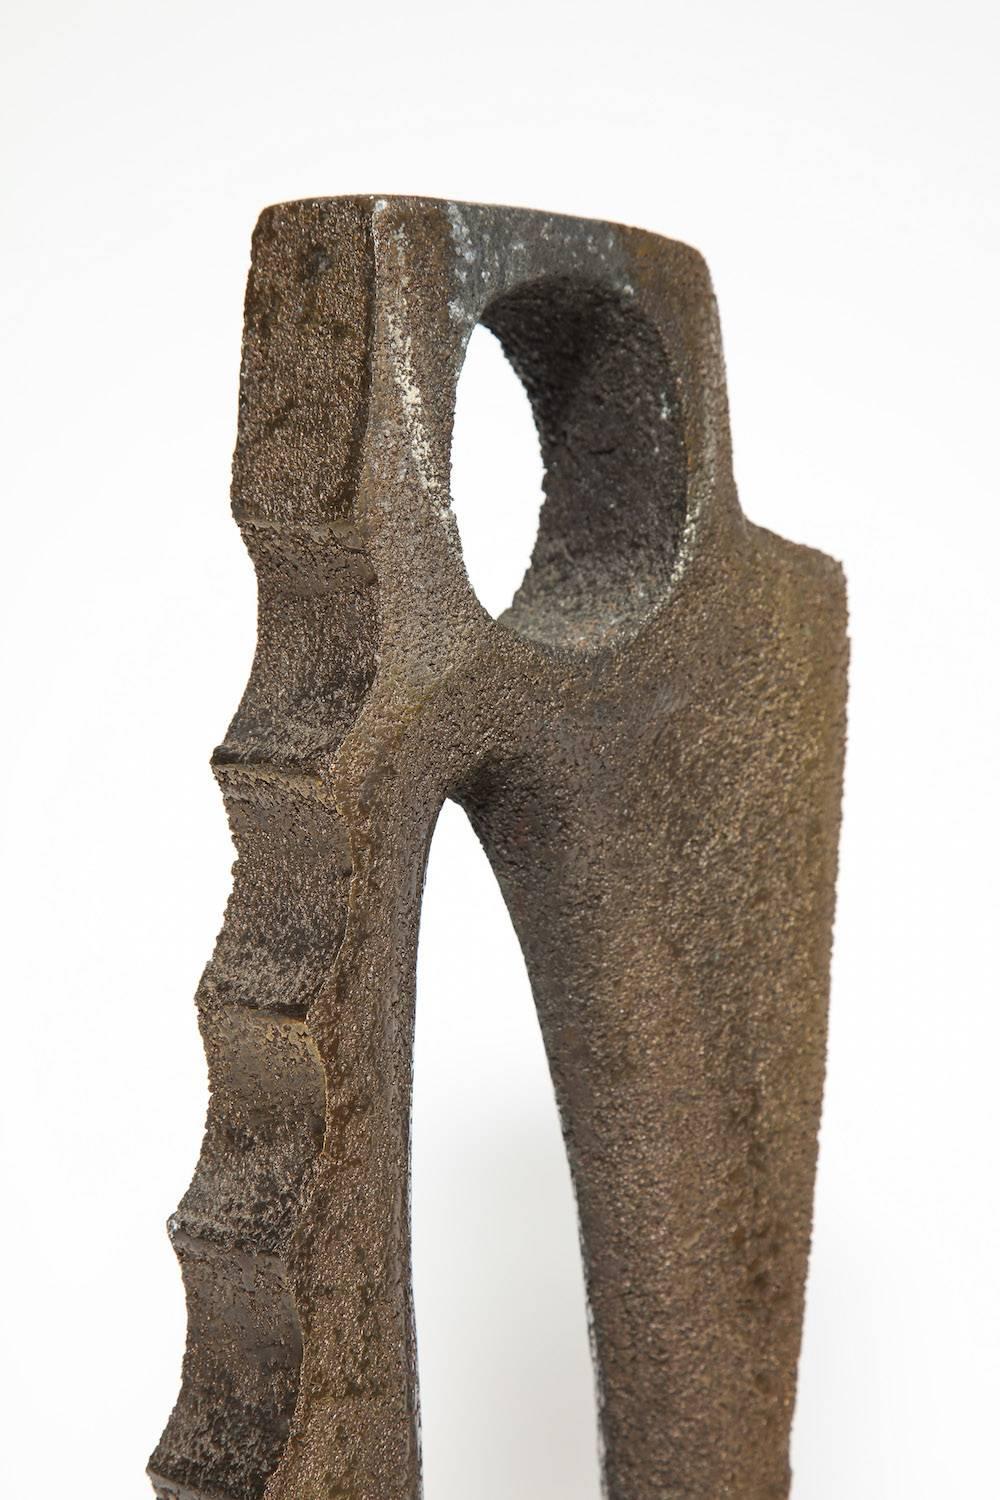 Cast bronze form with polished, rough-hewn surfaces. Beautifully realized, abstract form. Reminiscent of the work of Barbara Hepworth.